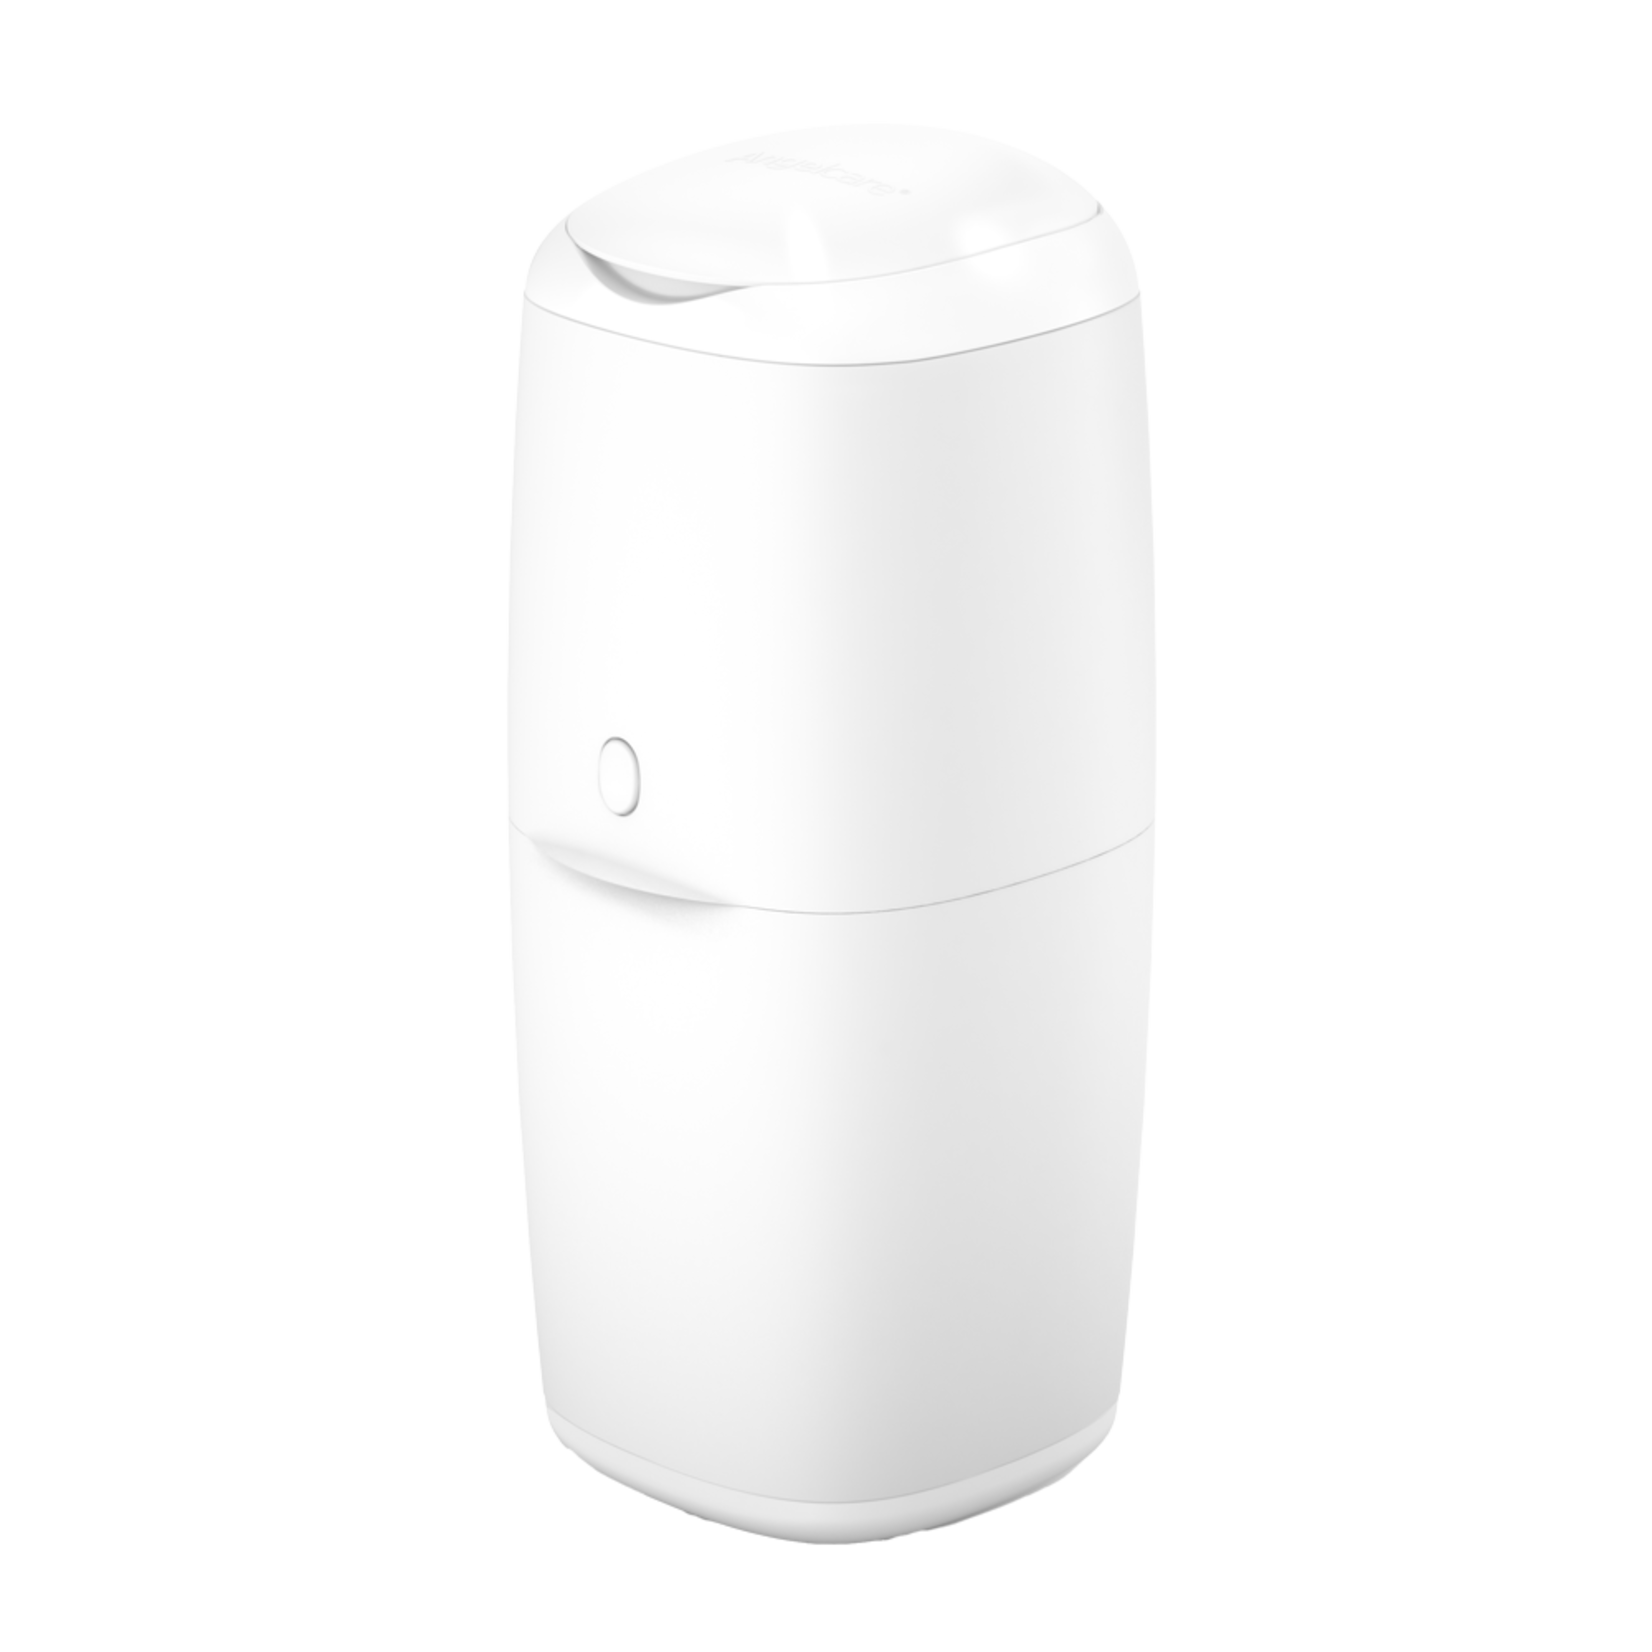 Angel Care Nappy Disposal System(AC322)